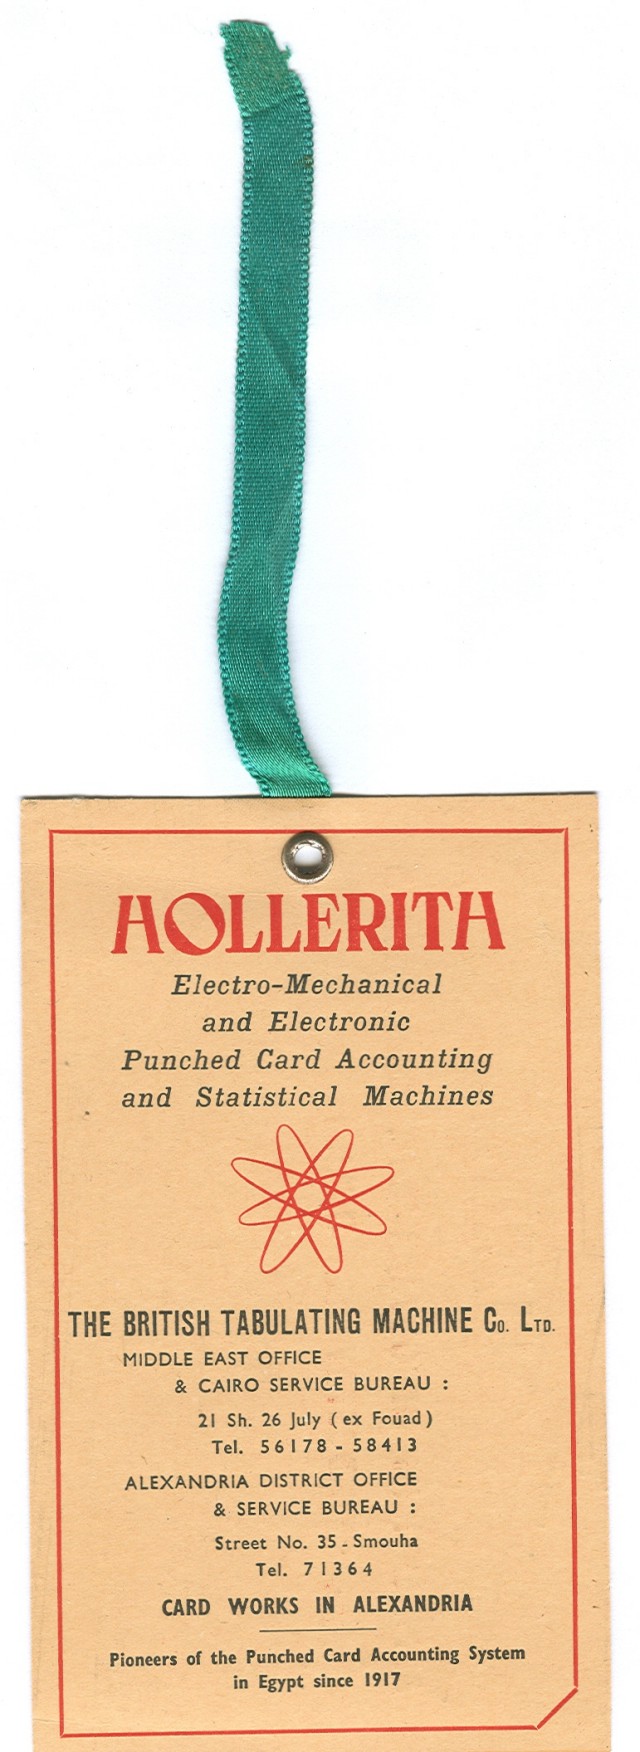 Obverse side of card with green ribbon.